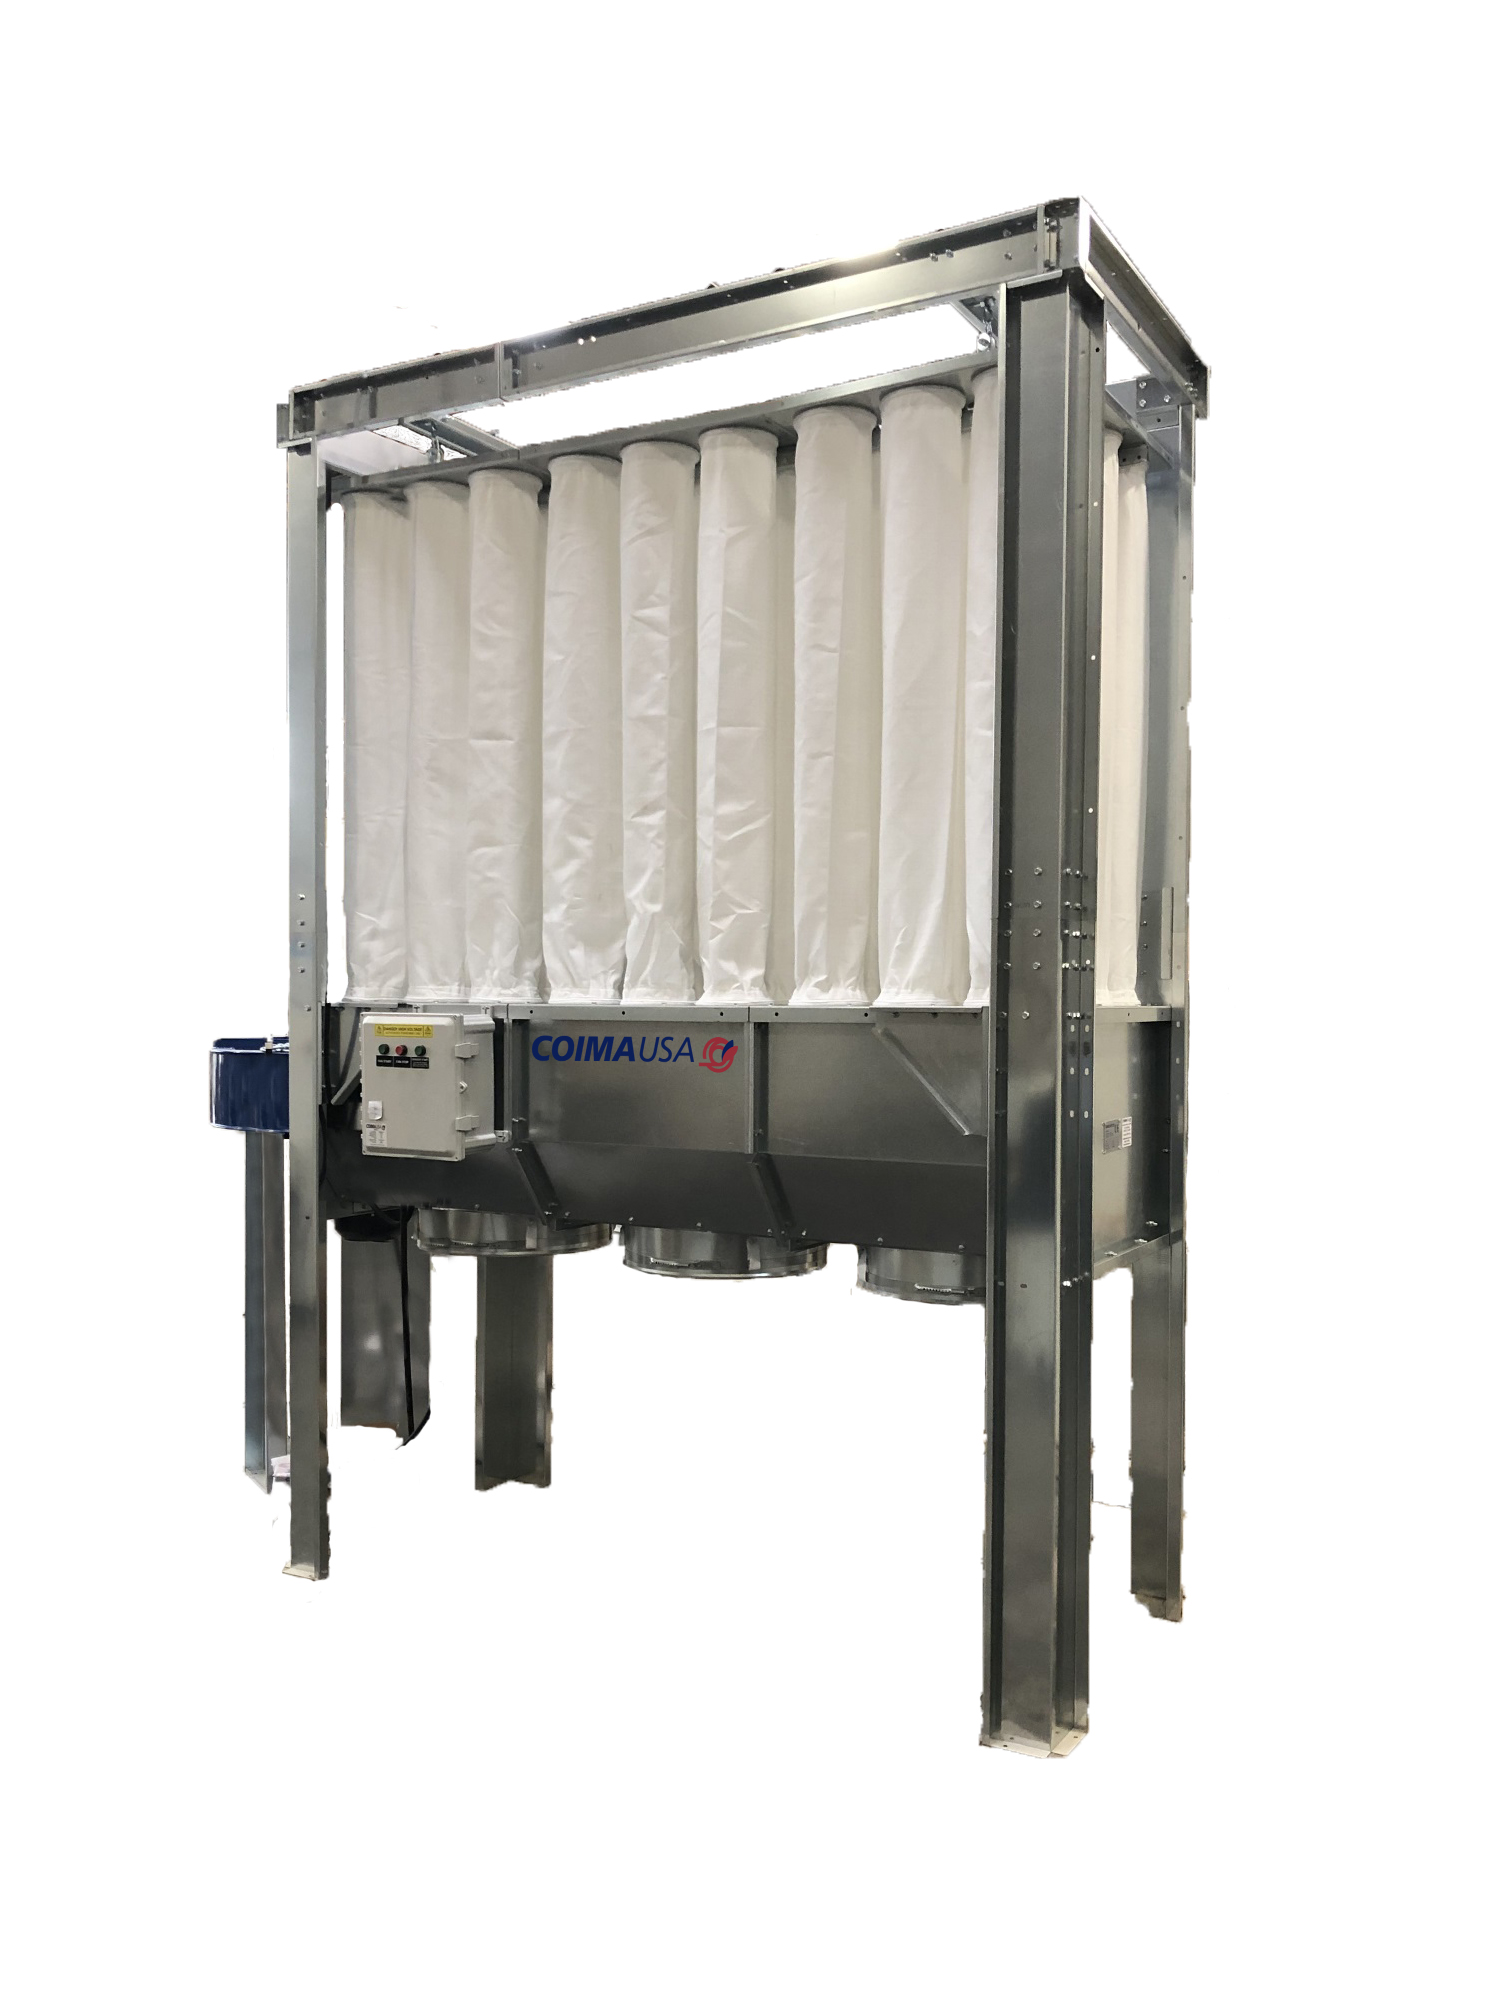 Coima SHK3 Enclosureless Dust Collector 10 HP Three Phase with Inlet